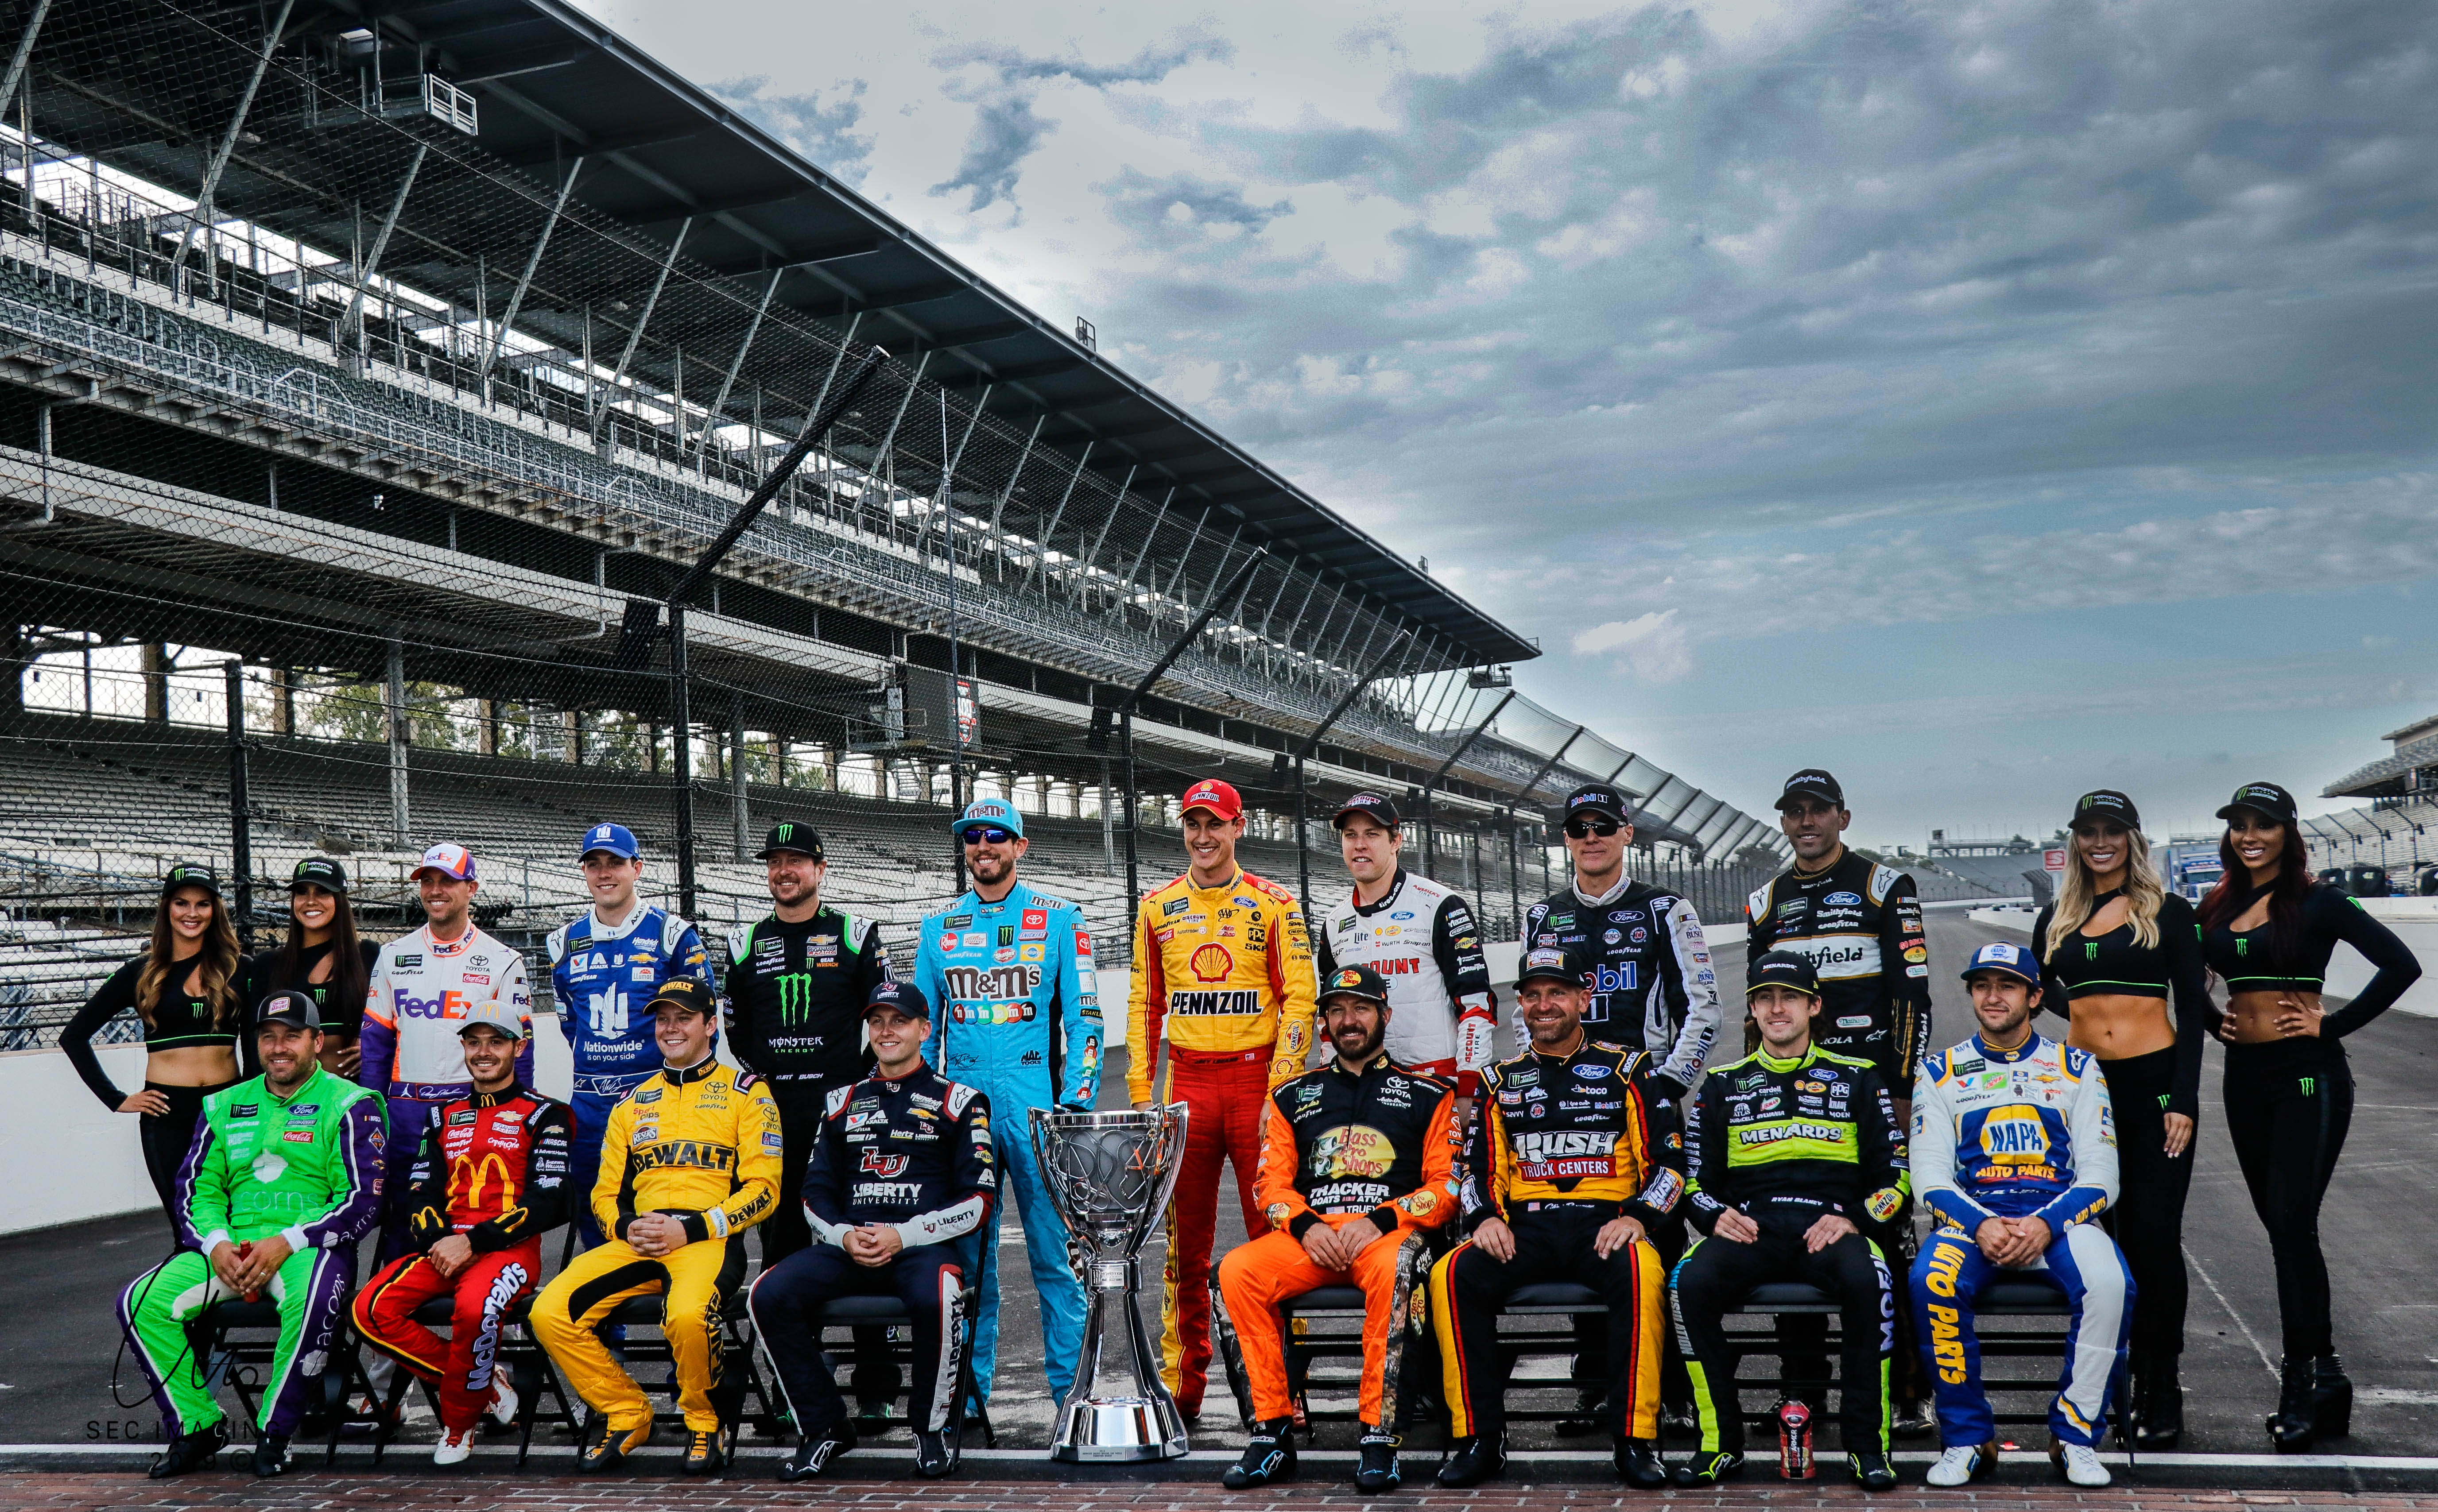 One of these 16 contenders plans to party like a champion at Homestead. (Photo Credit: Stephen Conley/TPF)